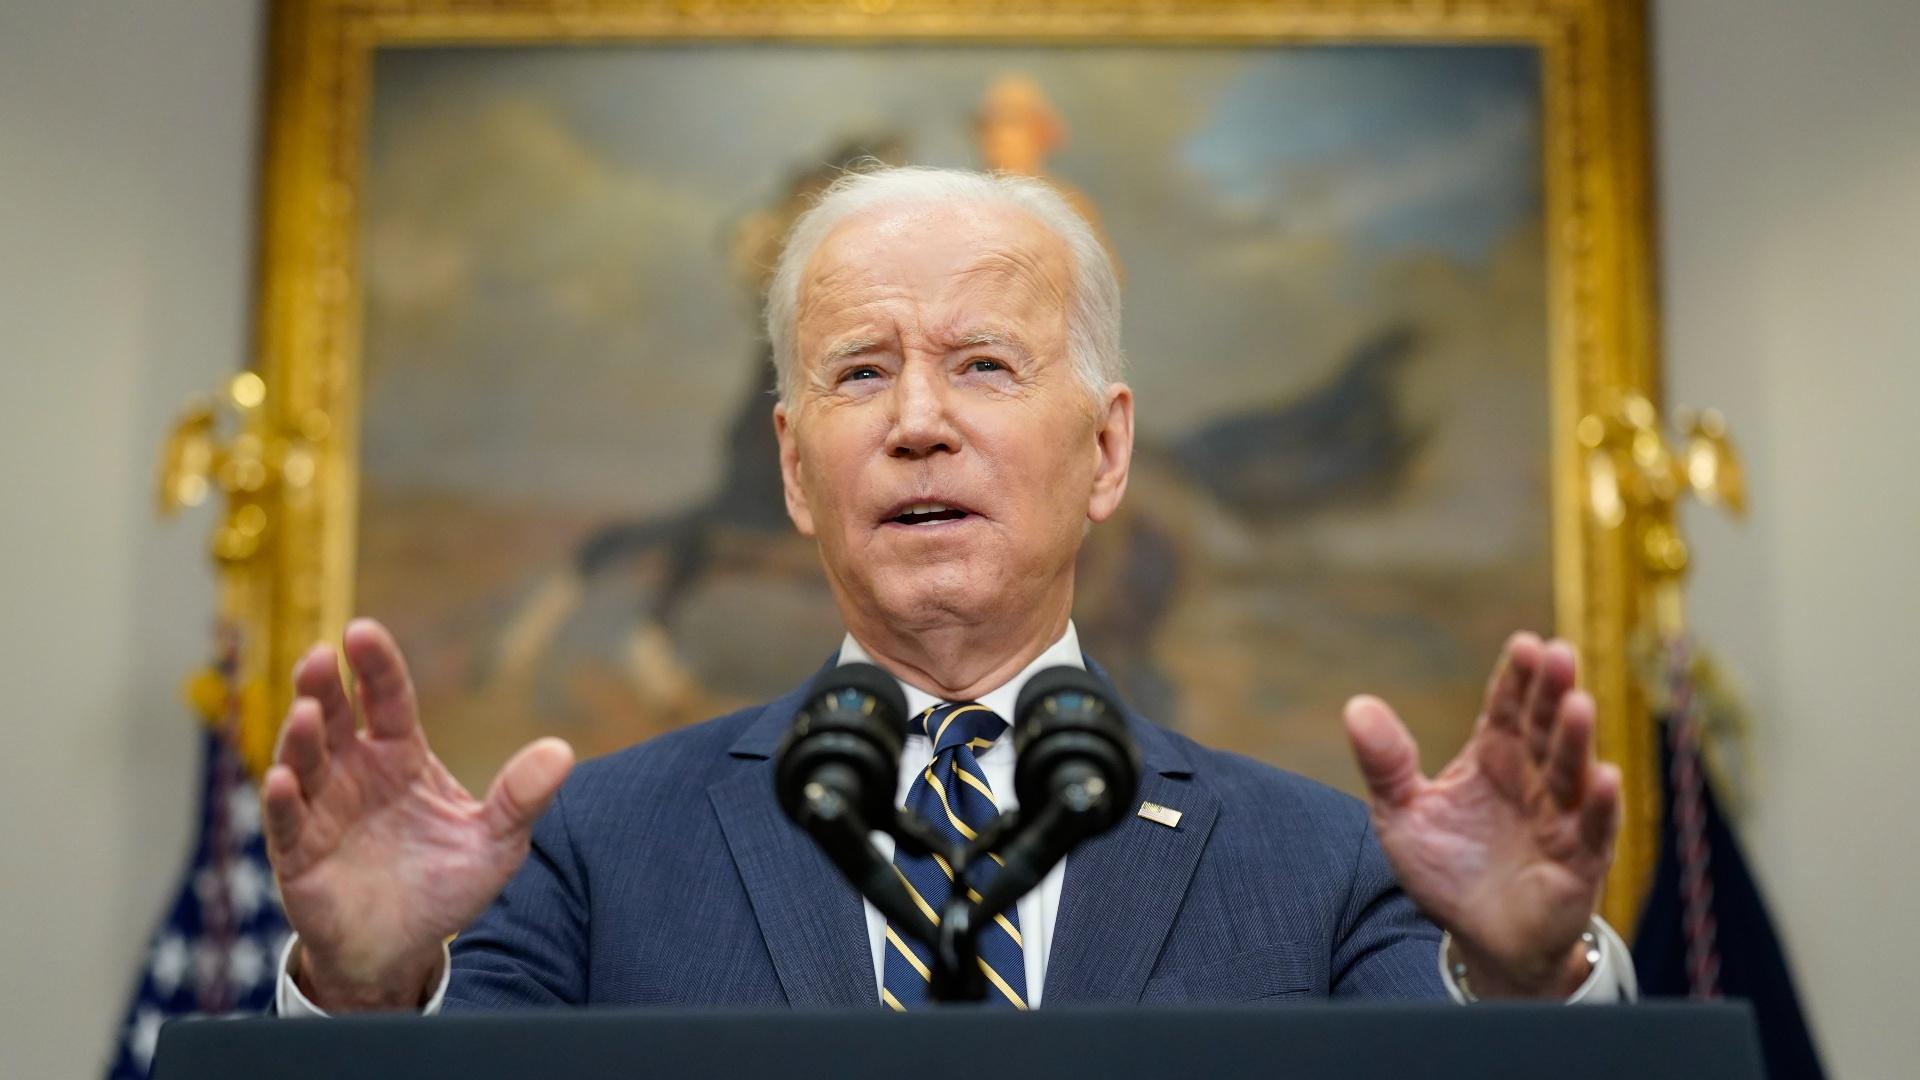 President Joe Biden announces that along with the European Union and the Group of Seven countries, the U.S. will move to revoke “most favored nation” trade status for Russia over its invasion of Ukraine, Friday, March 11, 2022, in the Roosevelt Room at the White House in Washington. (AP Photo / Andrew Harnik)